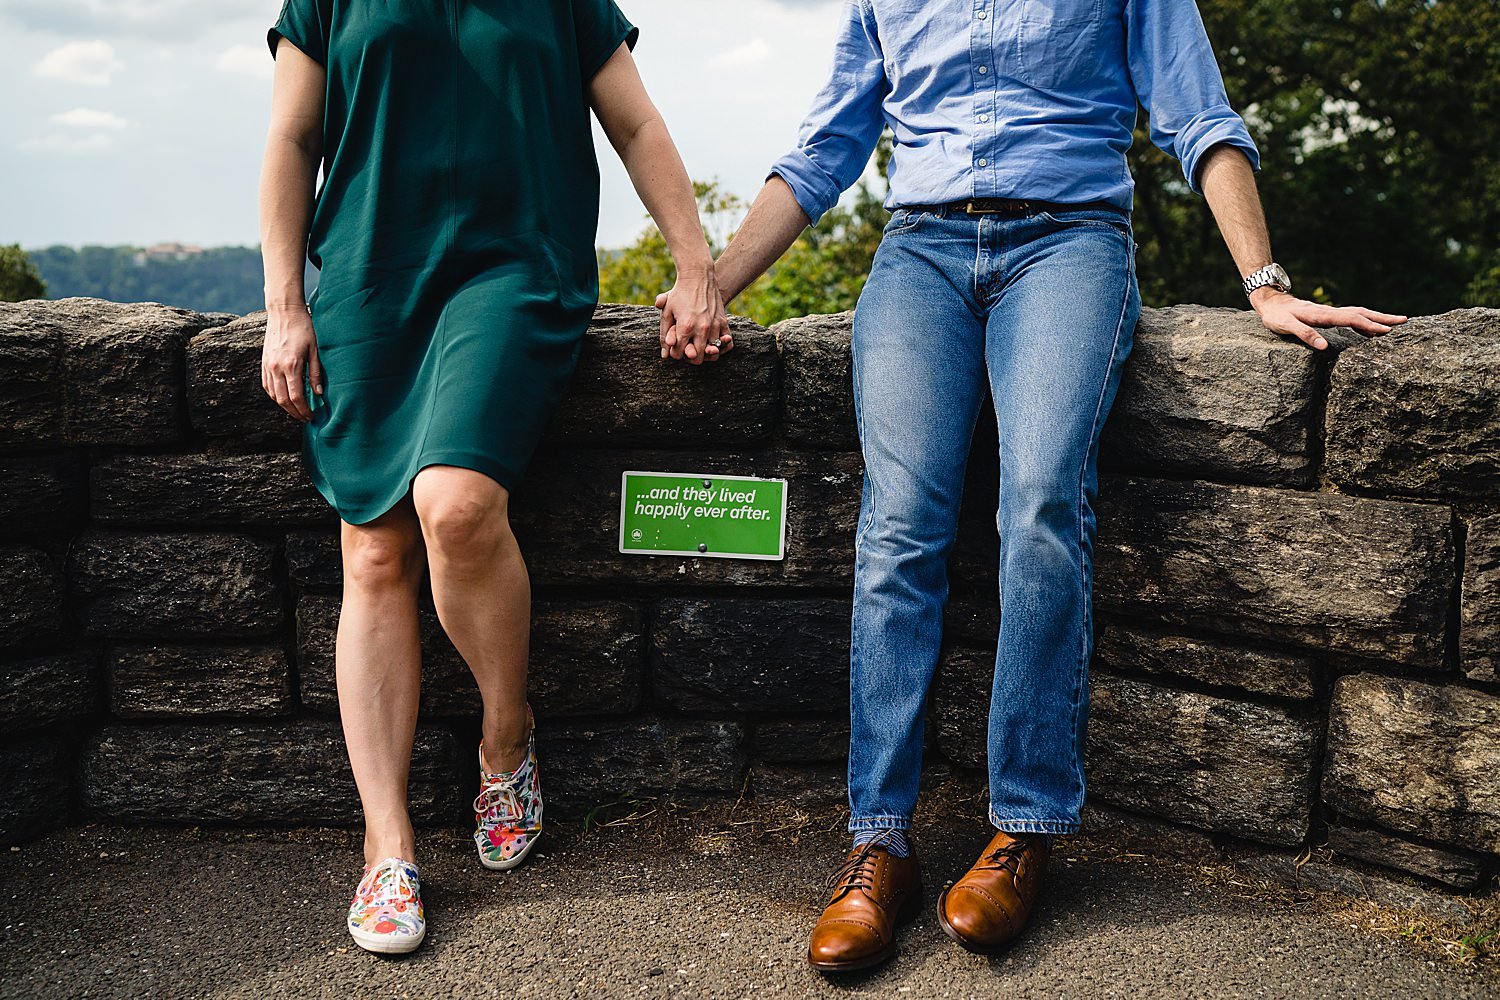 nyc engagement session at ft. tryon park